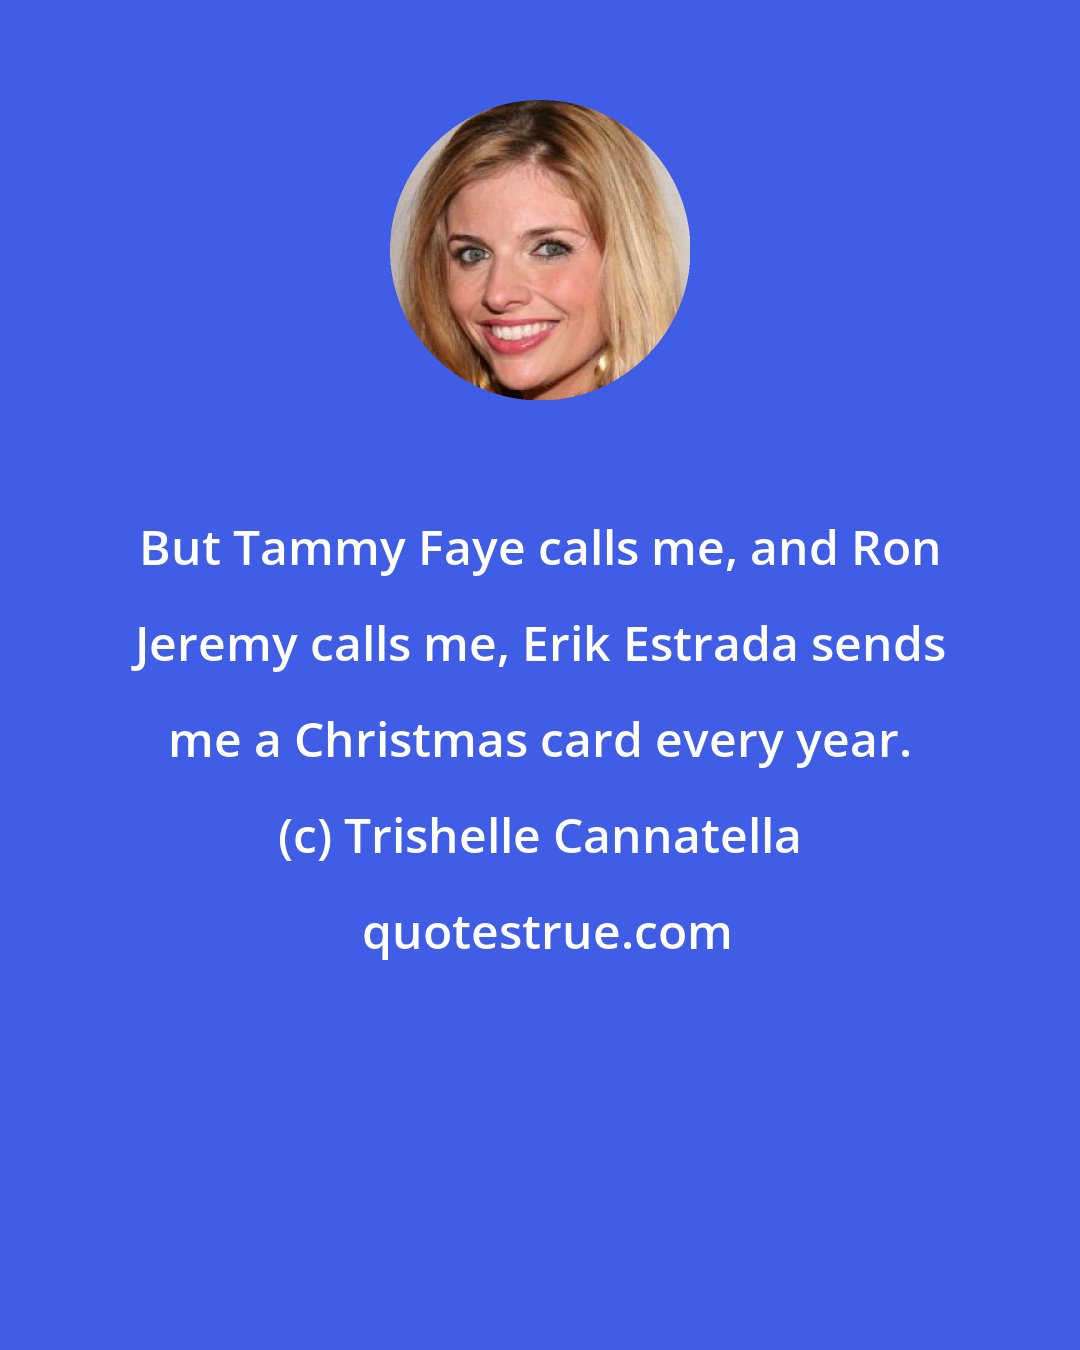 Trishelle Cannatella: But Tammy Faye calls me, and Ron Jeremy calls me, Erik Estrada sends me a Christmas card every year.